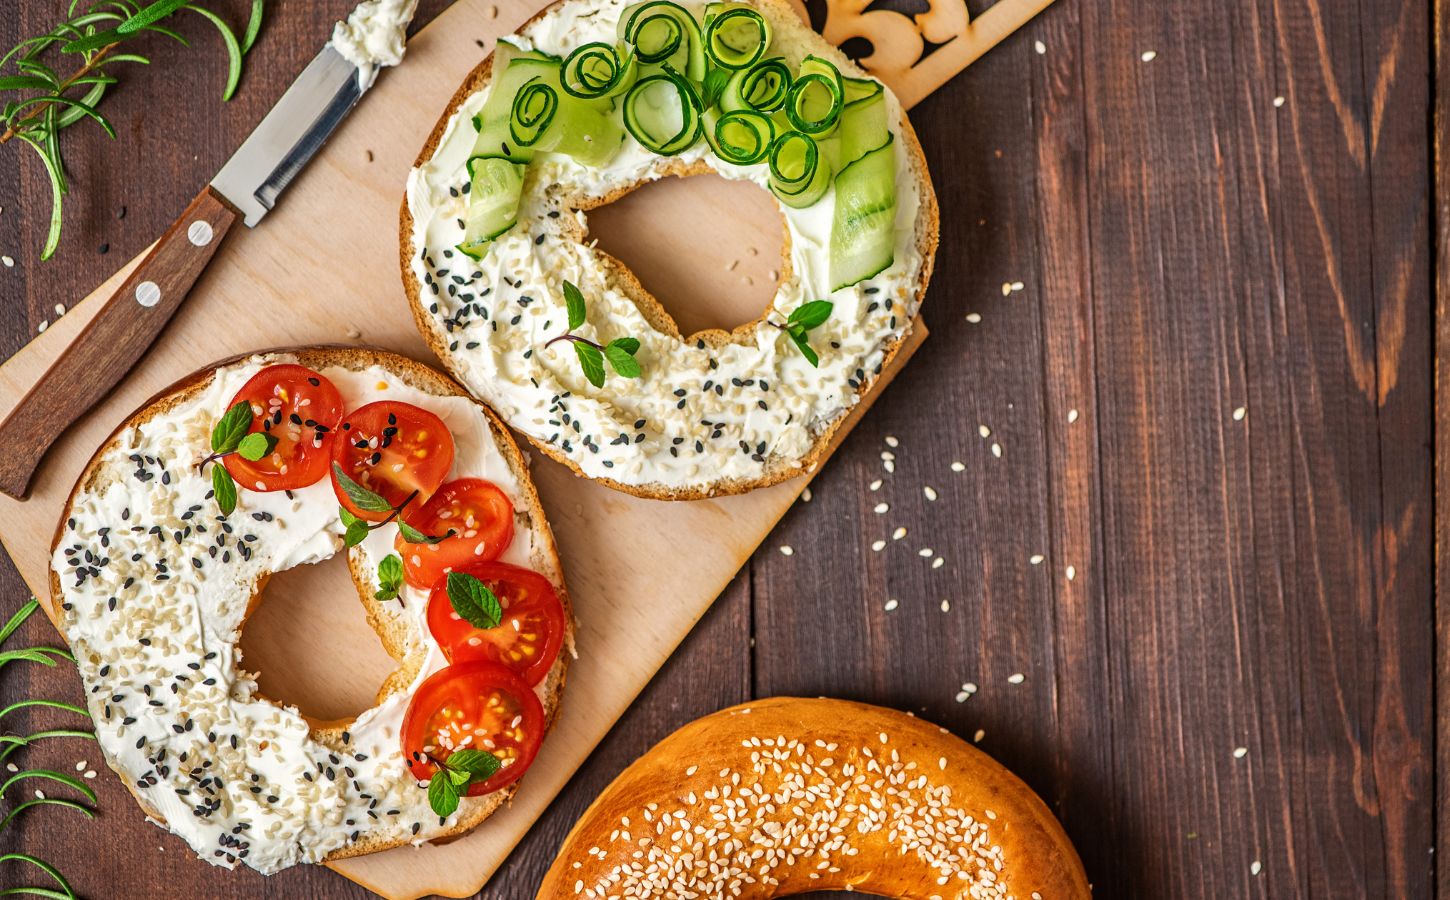 A bagel cut in half with cream cheese and tomatoes and chives